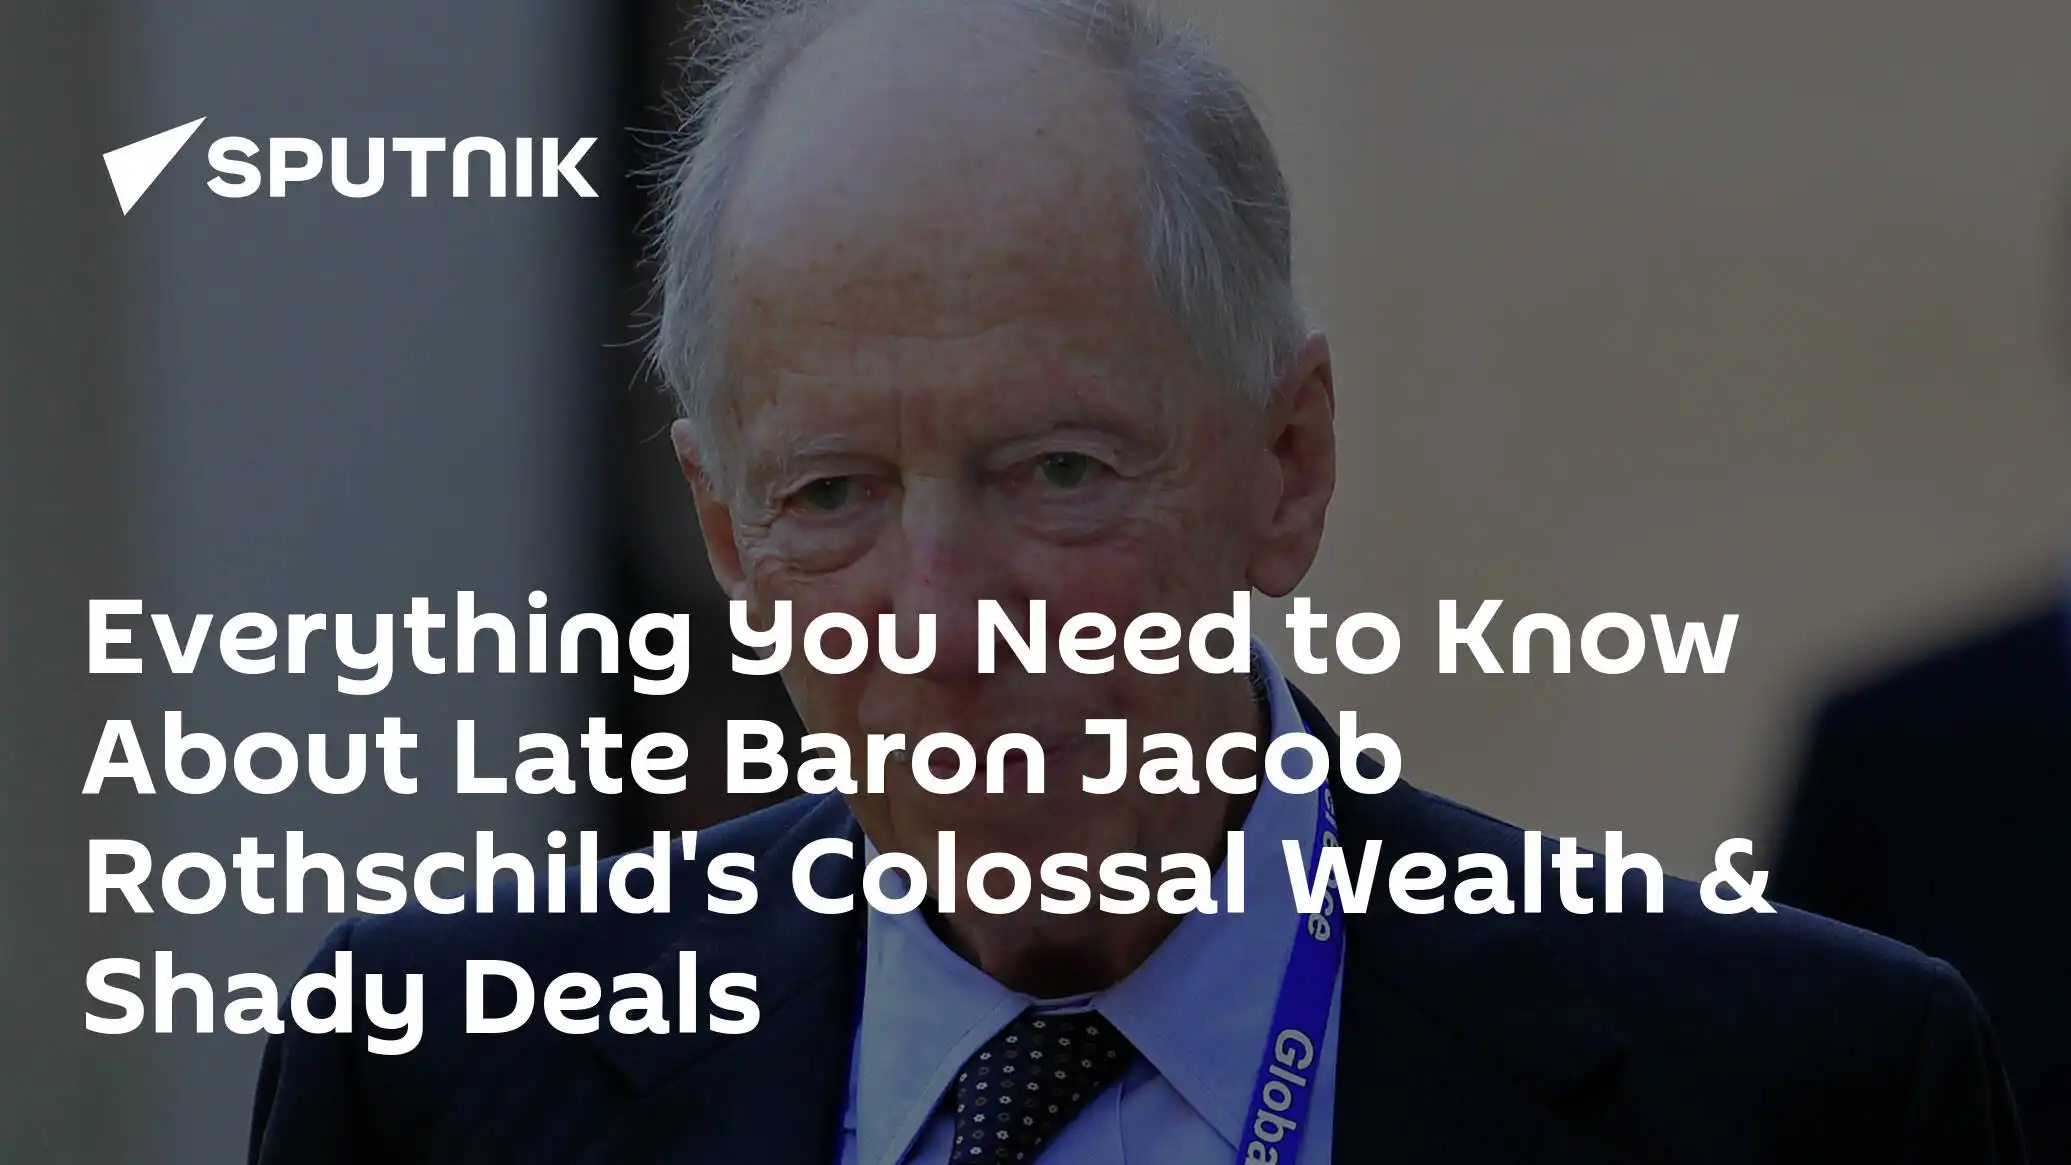 Late Baron Jacob Rothschild: Colossal Wealth and Shady Deals - Everything You Need to Know